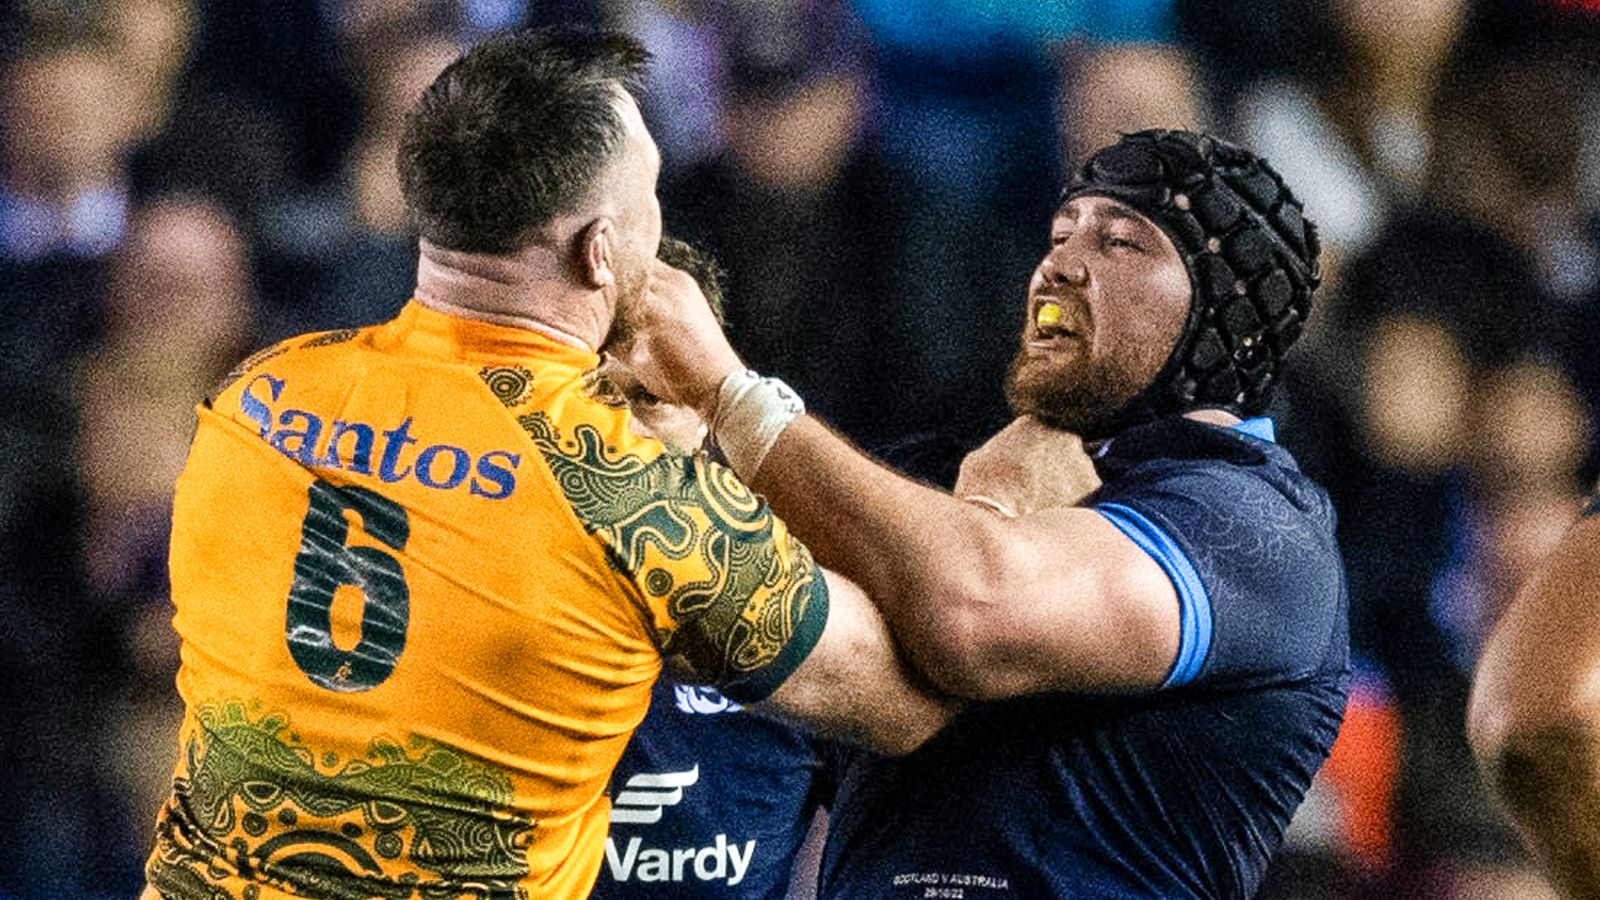 as-it-happened-scotland-15-16-australia-wallabies-win-by-a-point-at-murrayfield